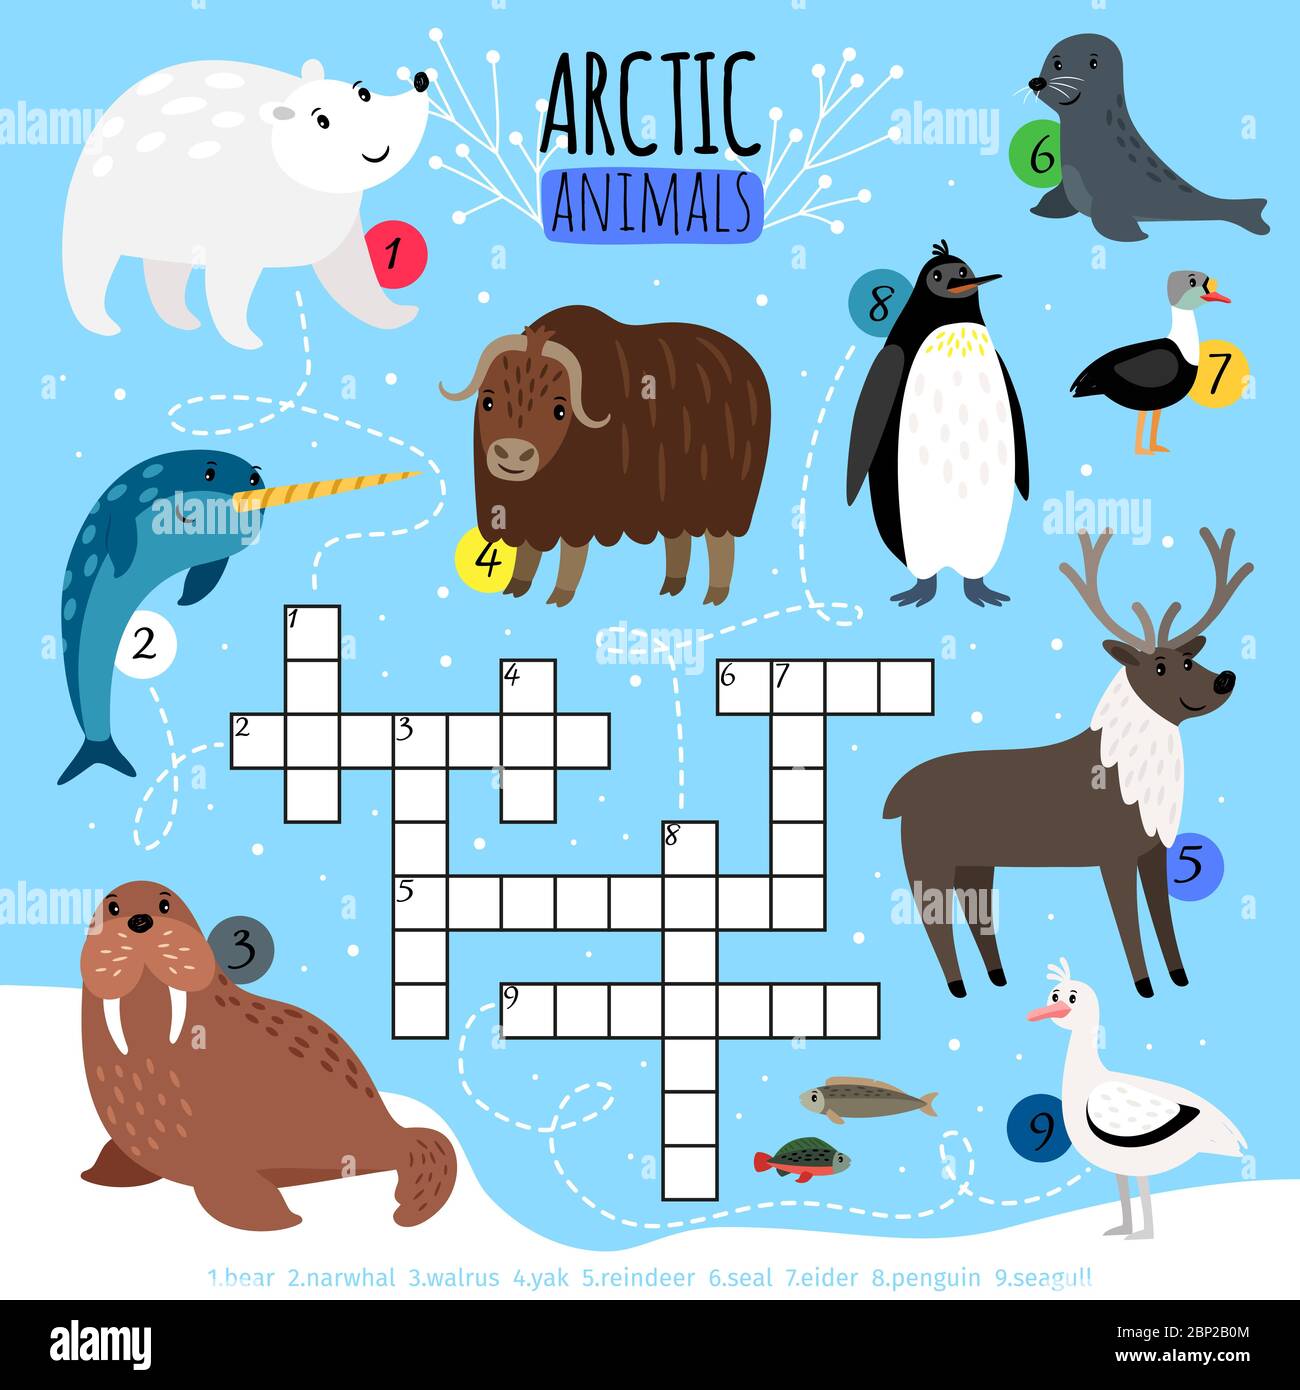 Arctic Crossword Puzzle Kids Words Cross Word Searching Game With Arctic Animals With Polar Bear And Walrus Reindeer And Penguin Vector Illustration Stock Vector Image Art Alamy